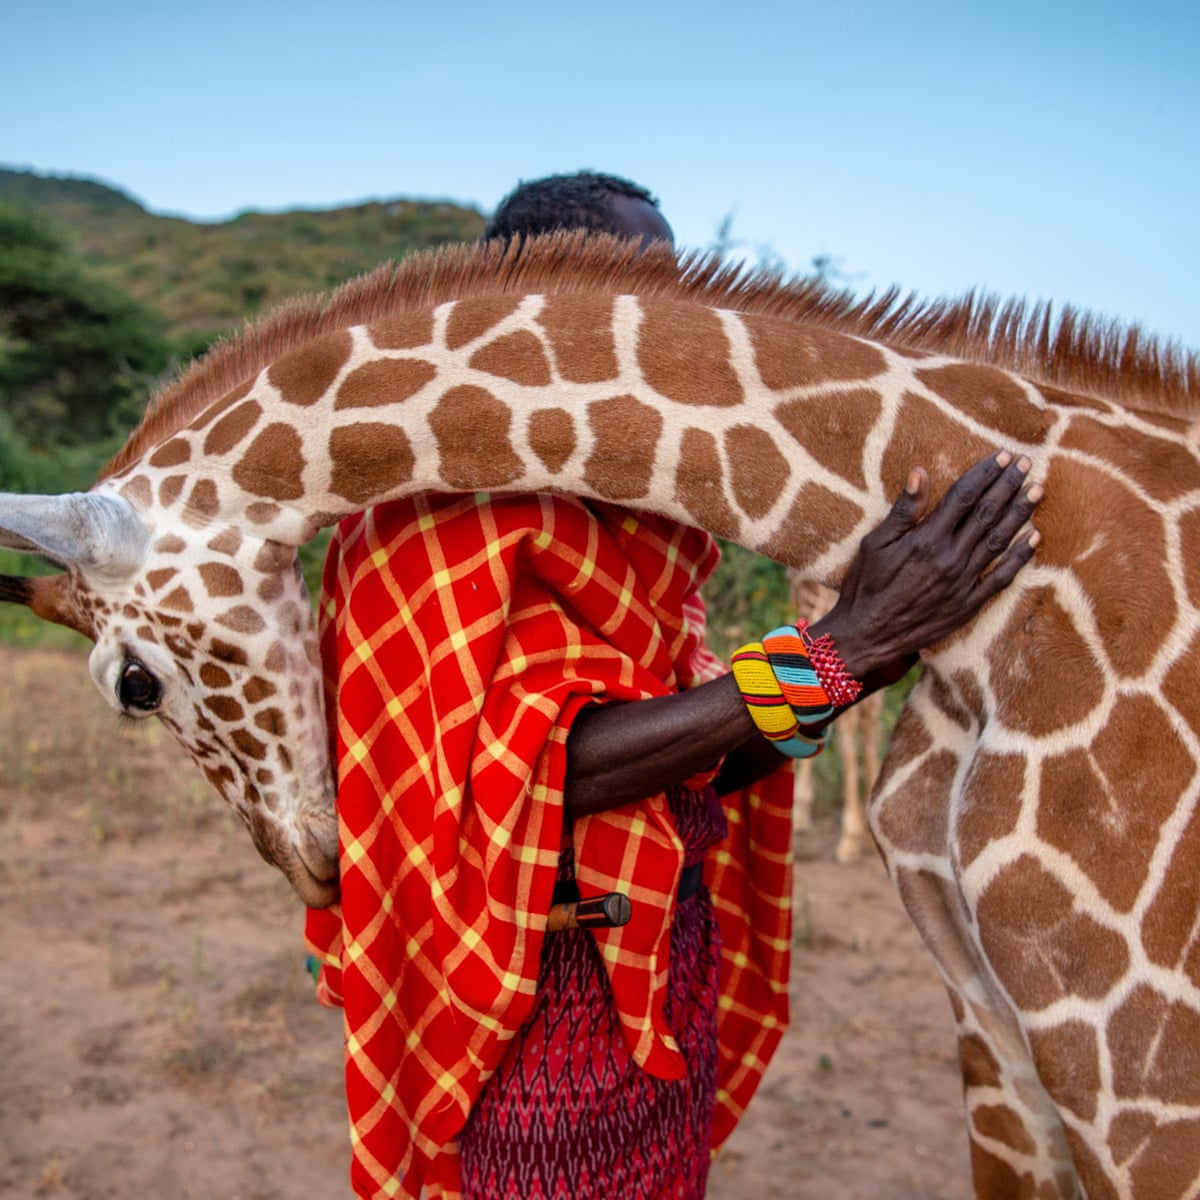 Fupi the orphaned giraffe returns to his whisperer – Ami Vitale's best  photograph | Photography | The Guardian